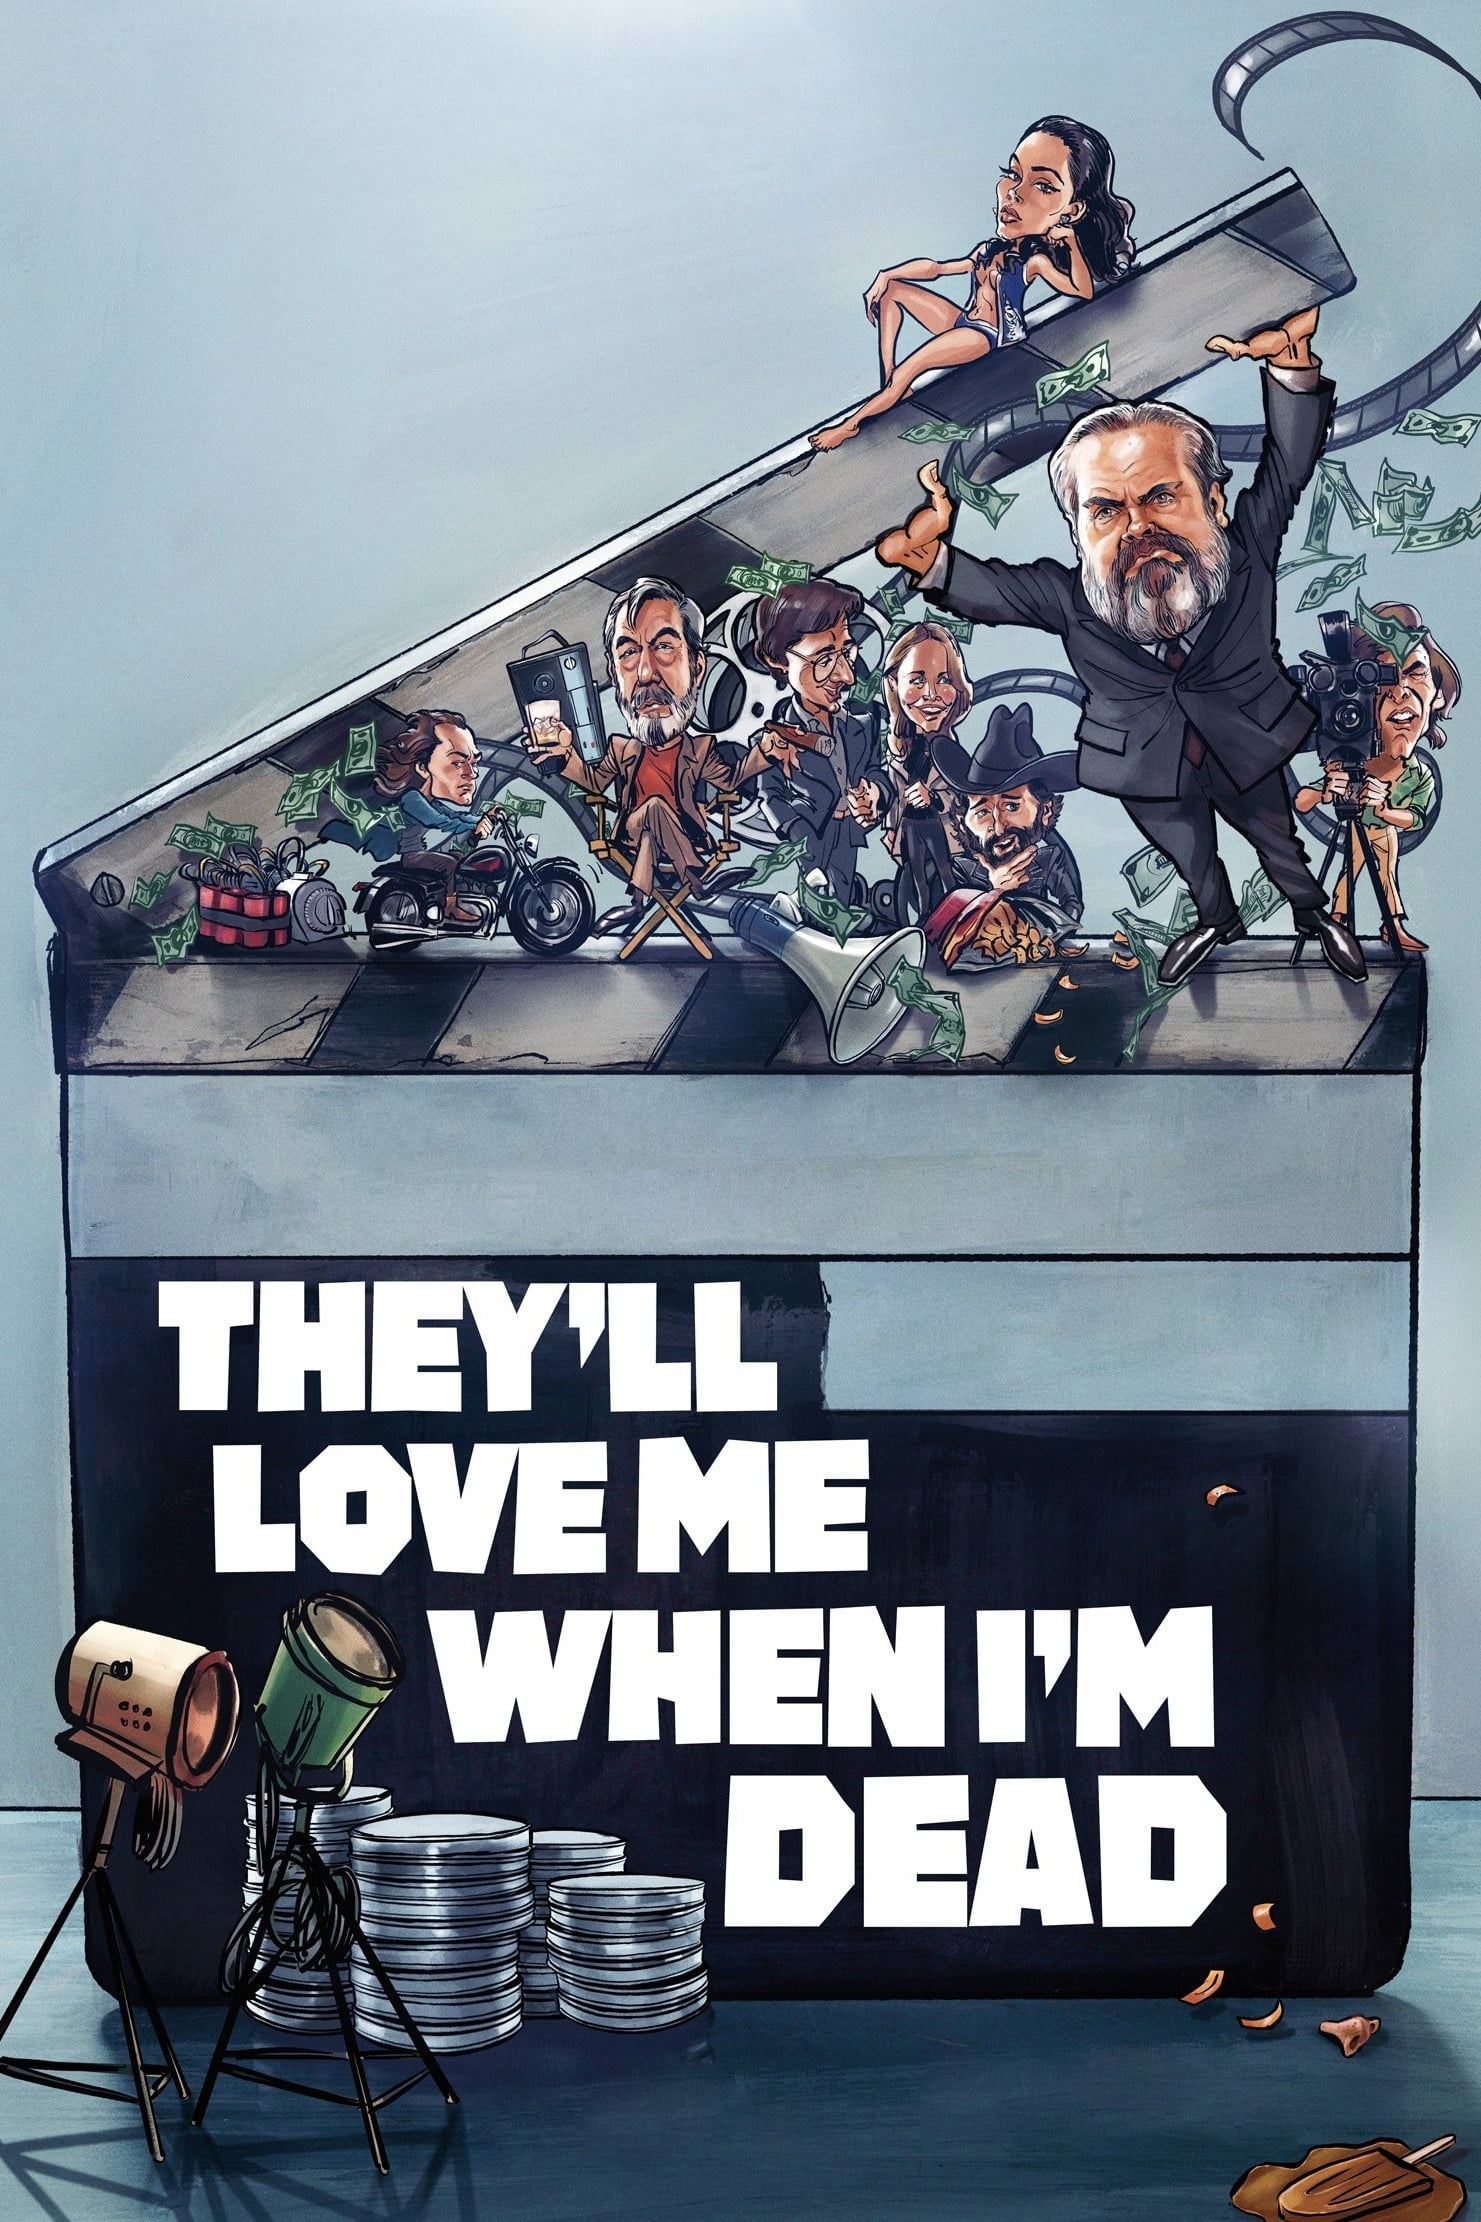 They'll Love Me When I'm Dead (2018)